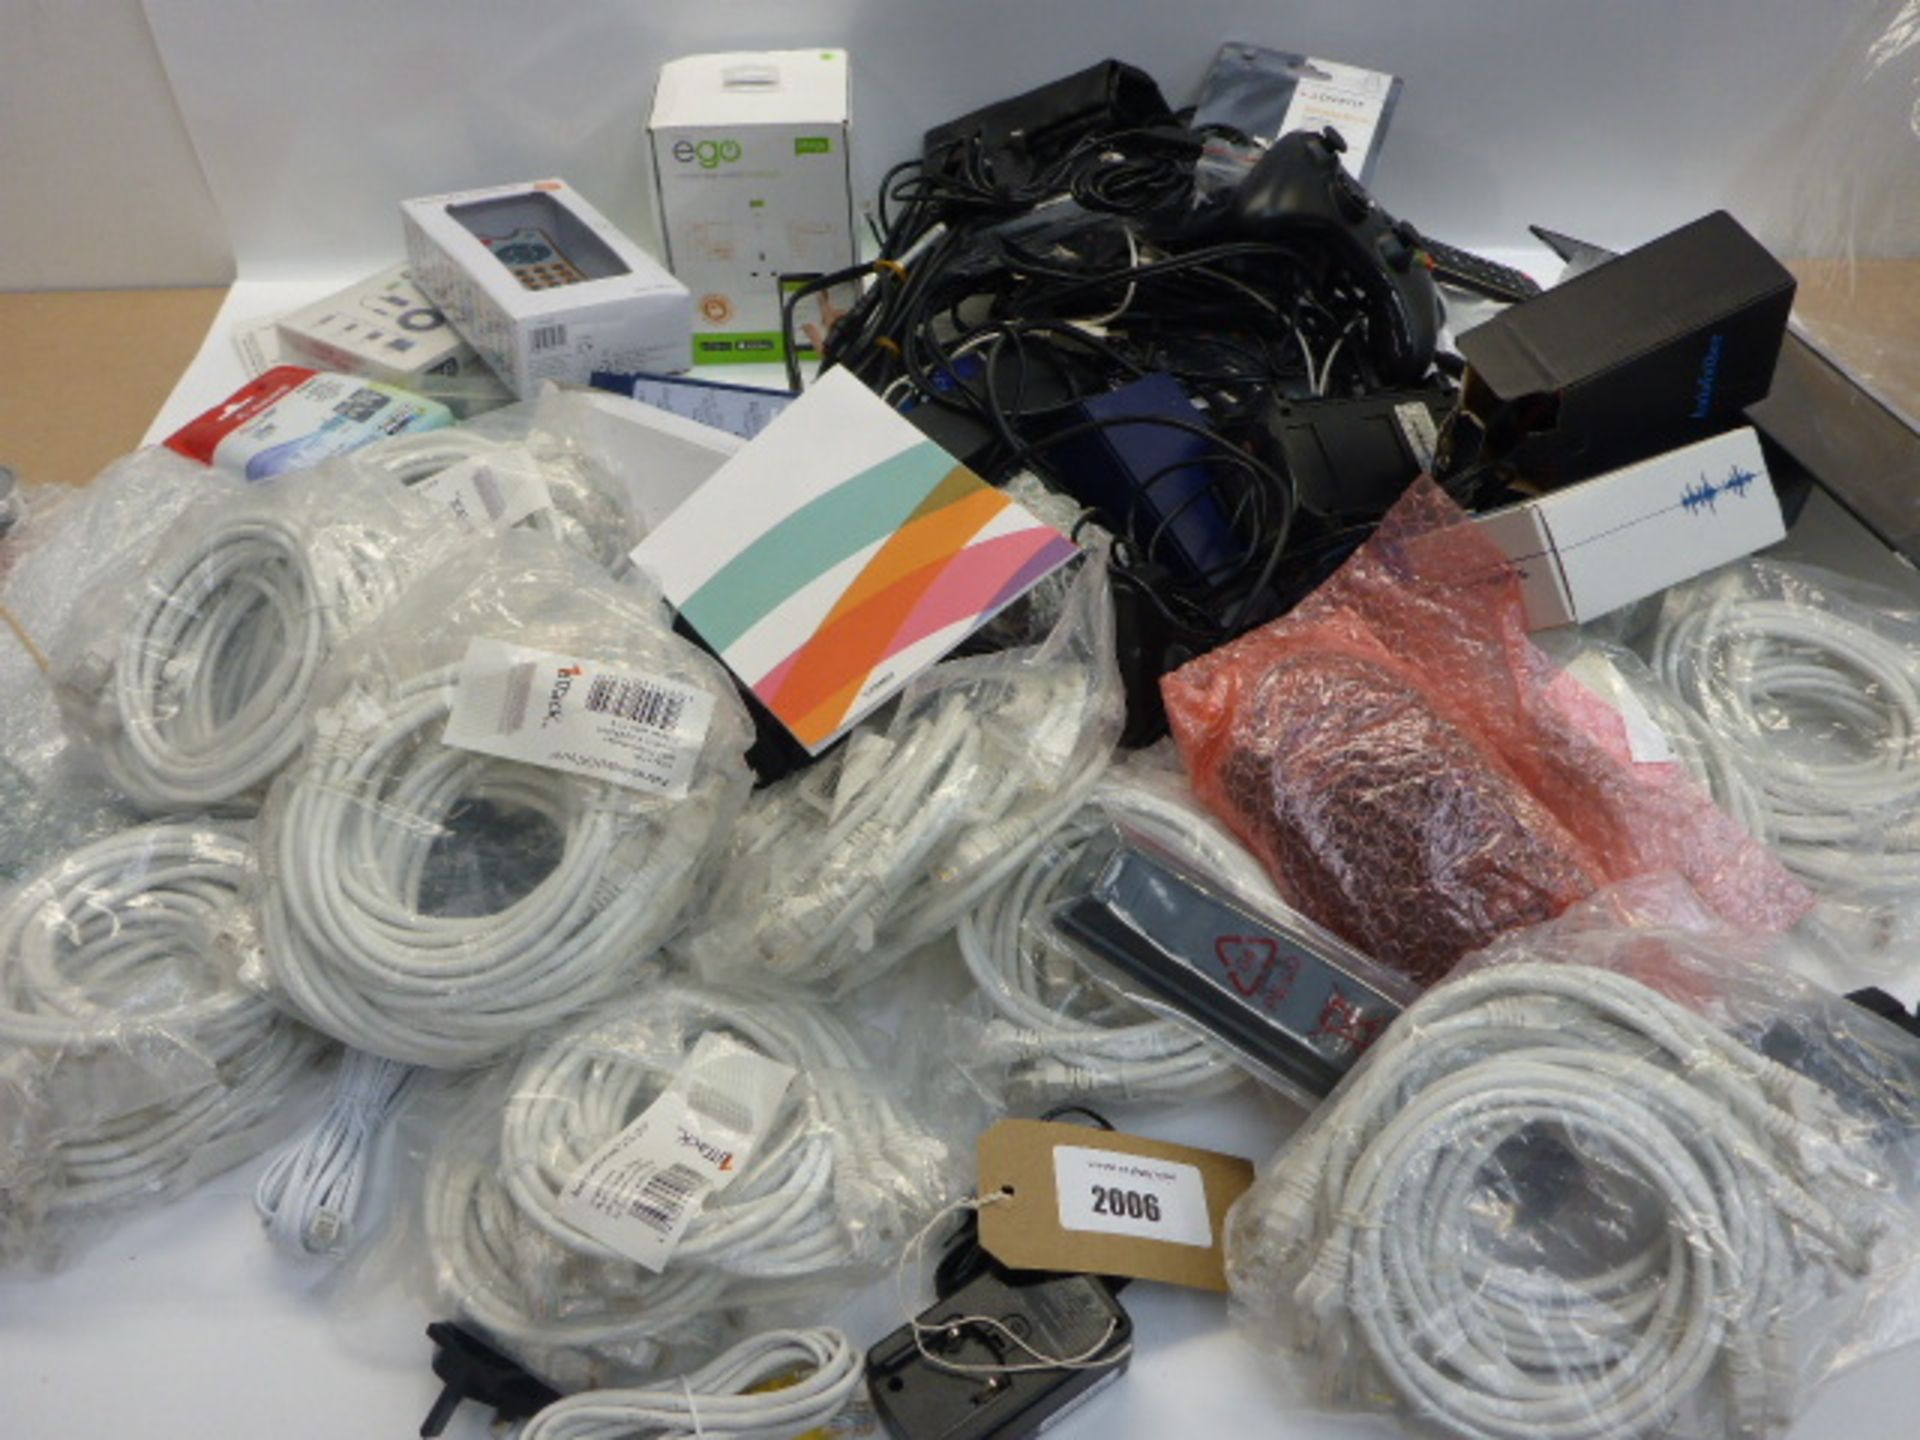 Bag containing quantity of electrical accessories; leads, cables, PC mice, adapters, remotes etc